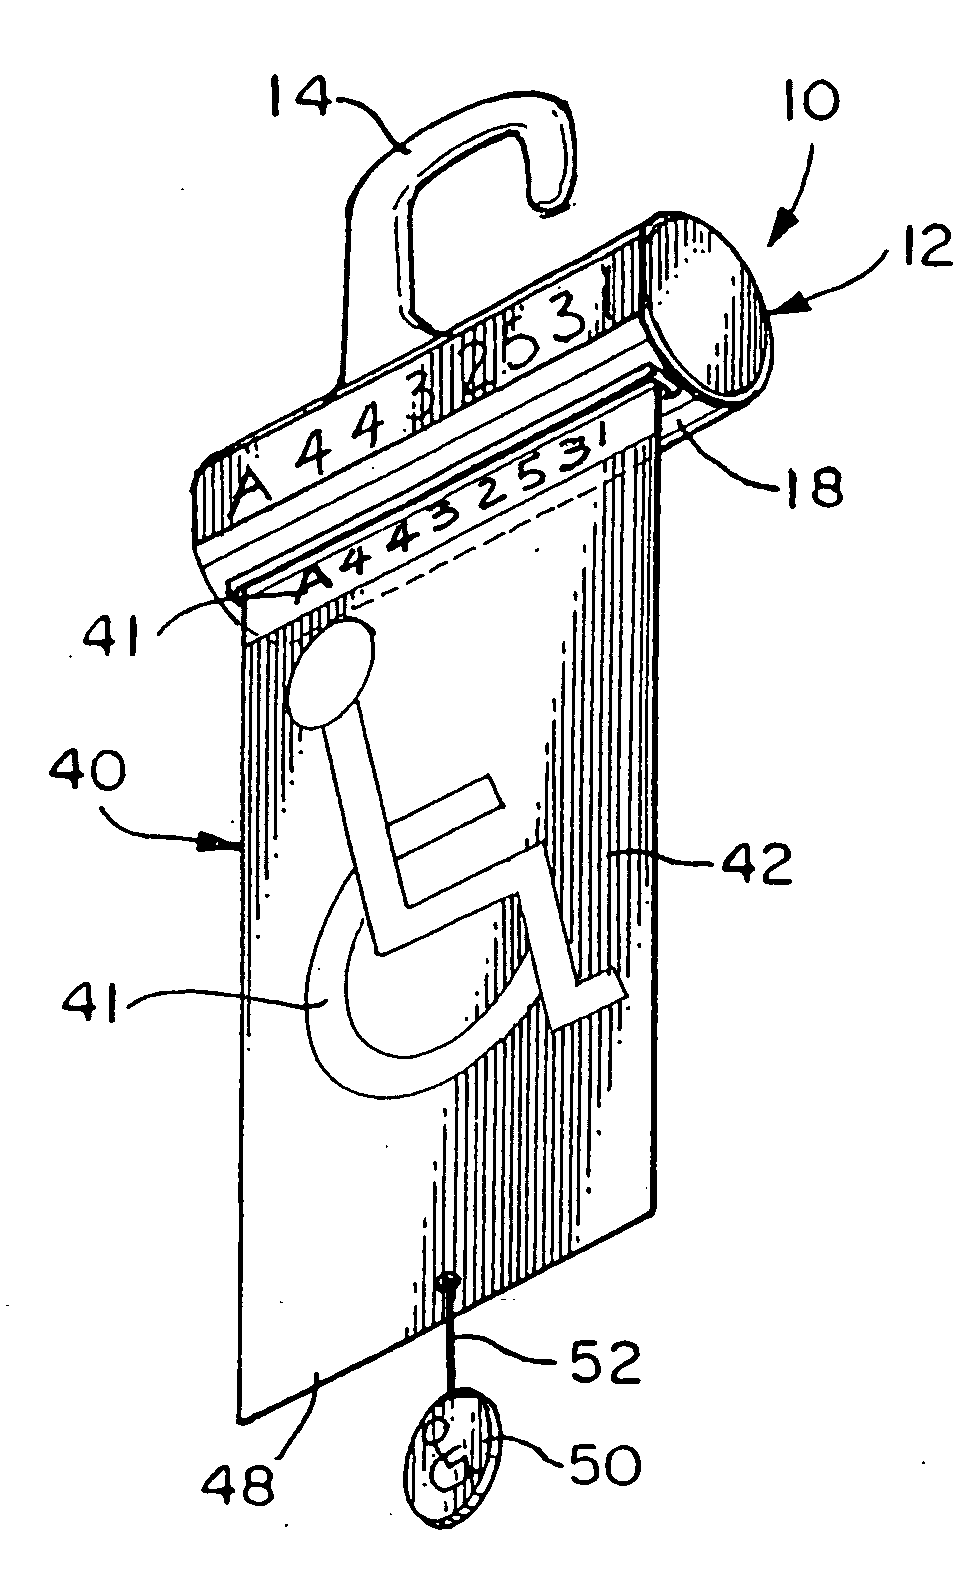 Device for displaying a disabled parking permit